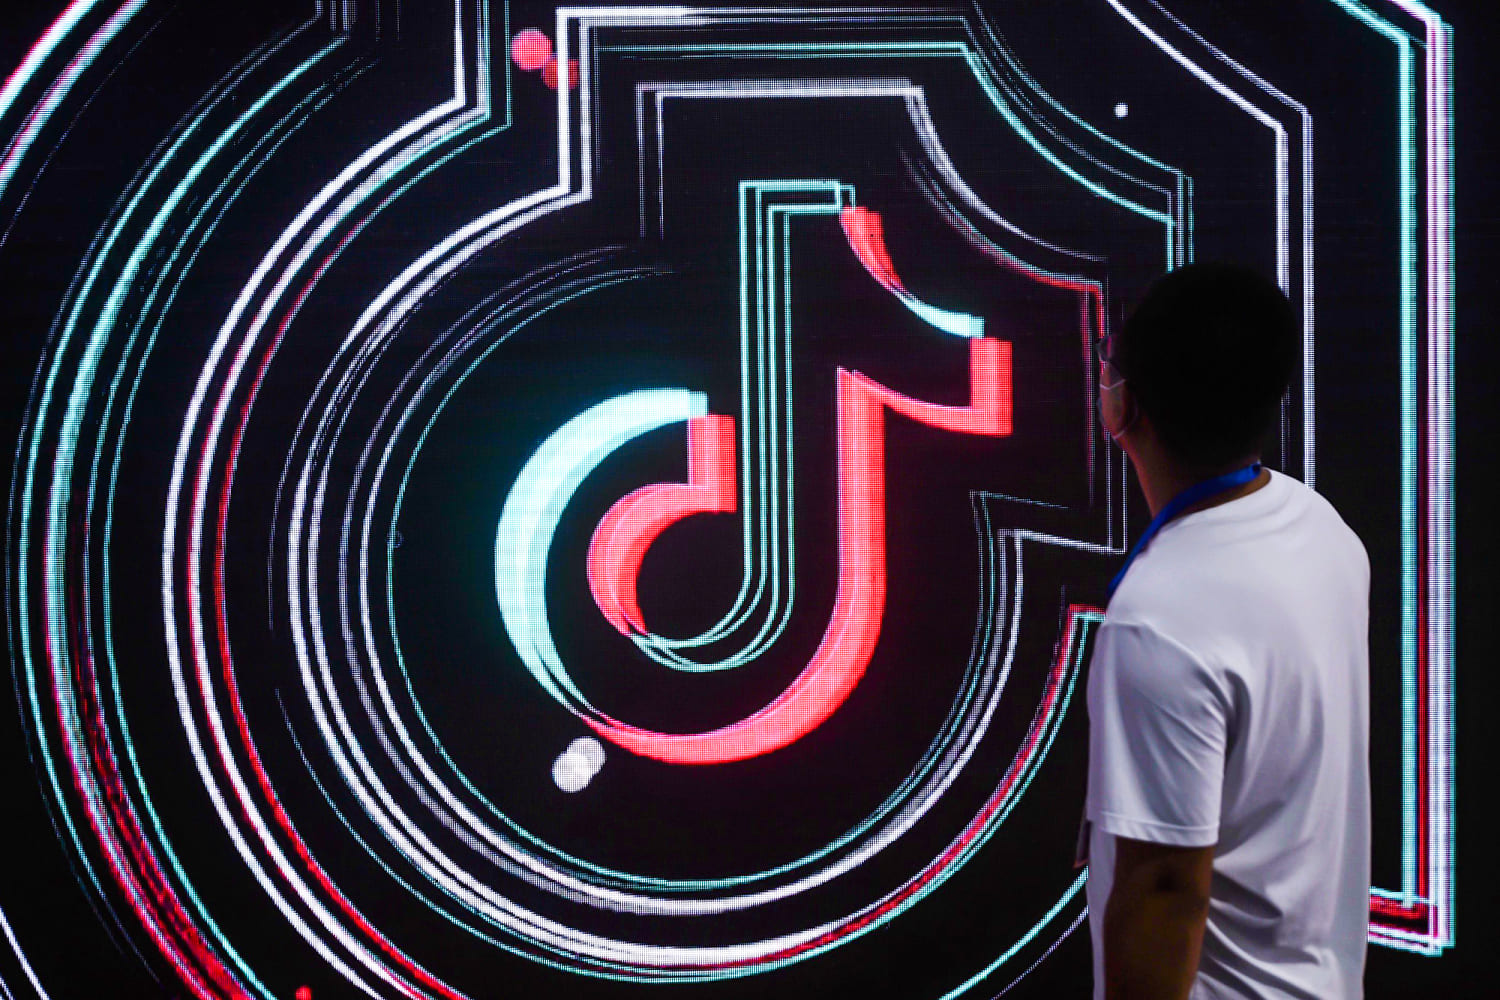 TikTok and Universal Music Group settle royalty dispute with new licensing agreement